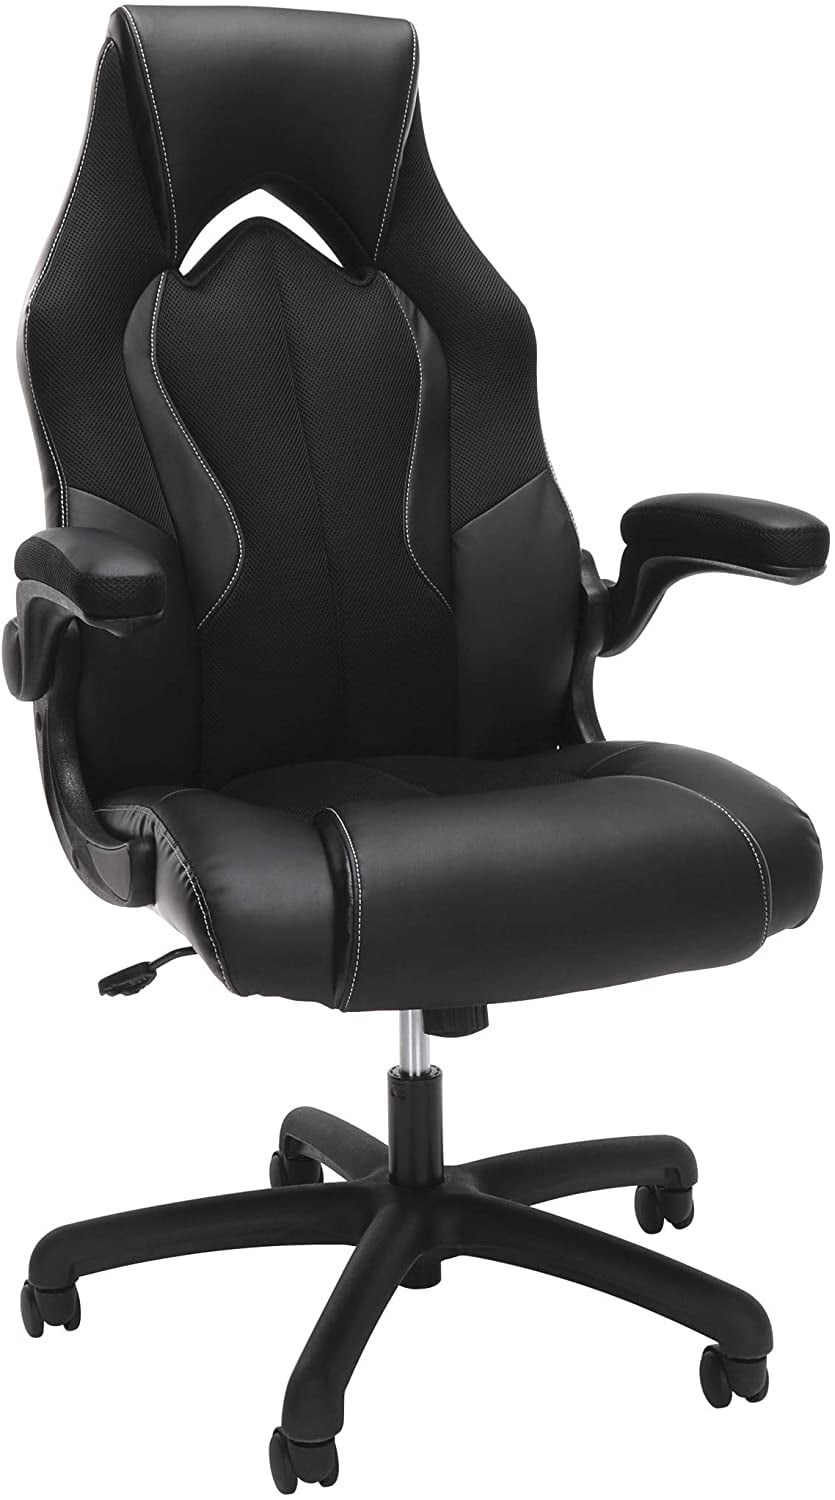 ESS-3086-BLK in Black OFM High-Back Racing Style Bonded Leather Gaming Chair 